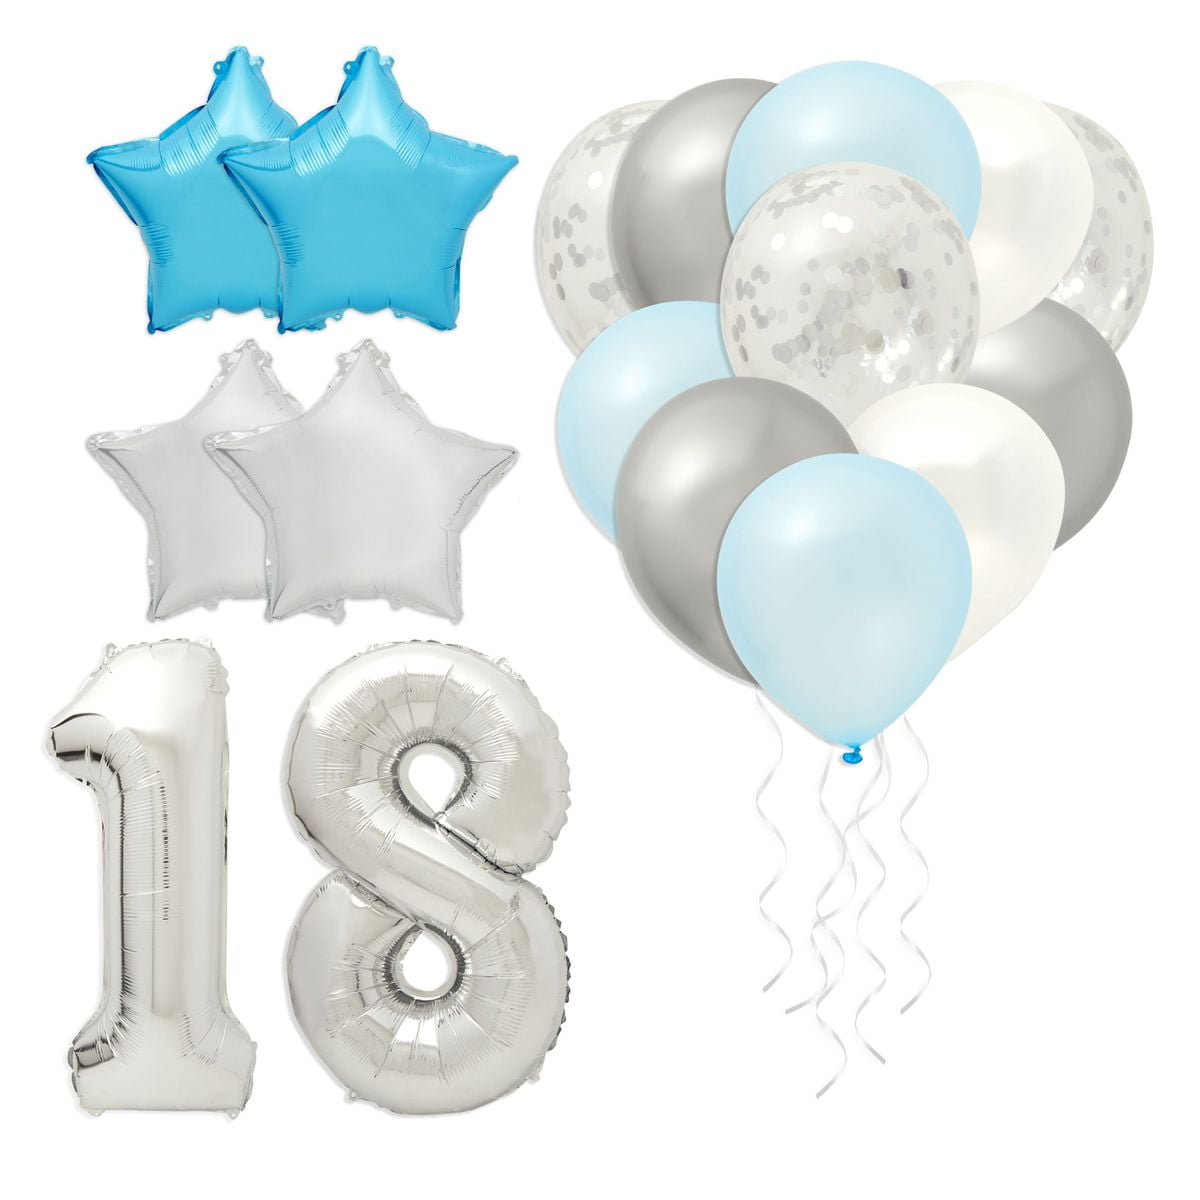 Anniversary Party Balloons 20 Pcs White & Confetti Latex Balloons 4 Creative Foil Balloons for Engagement Party Decorations